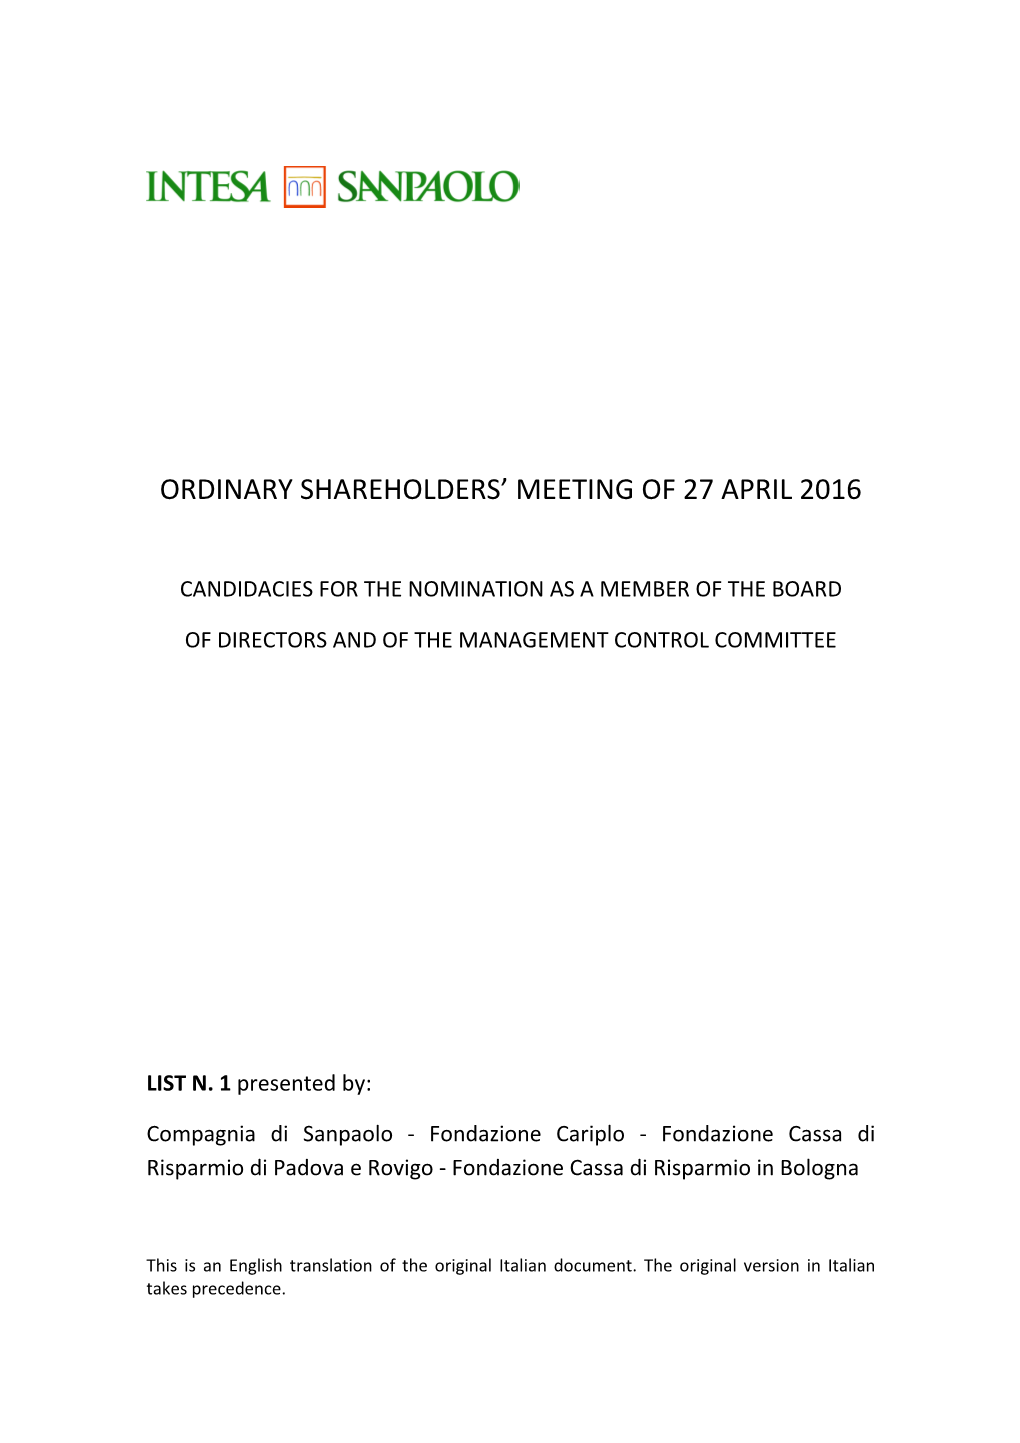 Ordinary Shareholders' Meeting of 27 April 2016